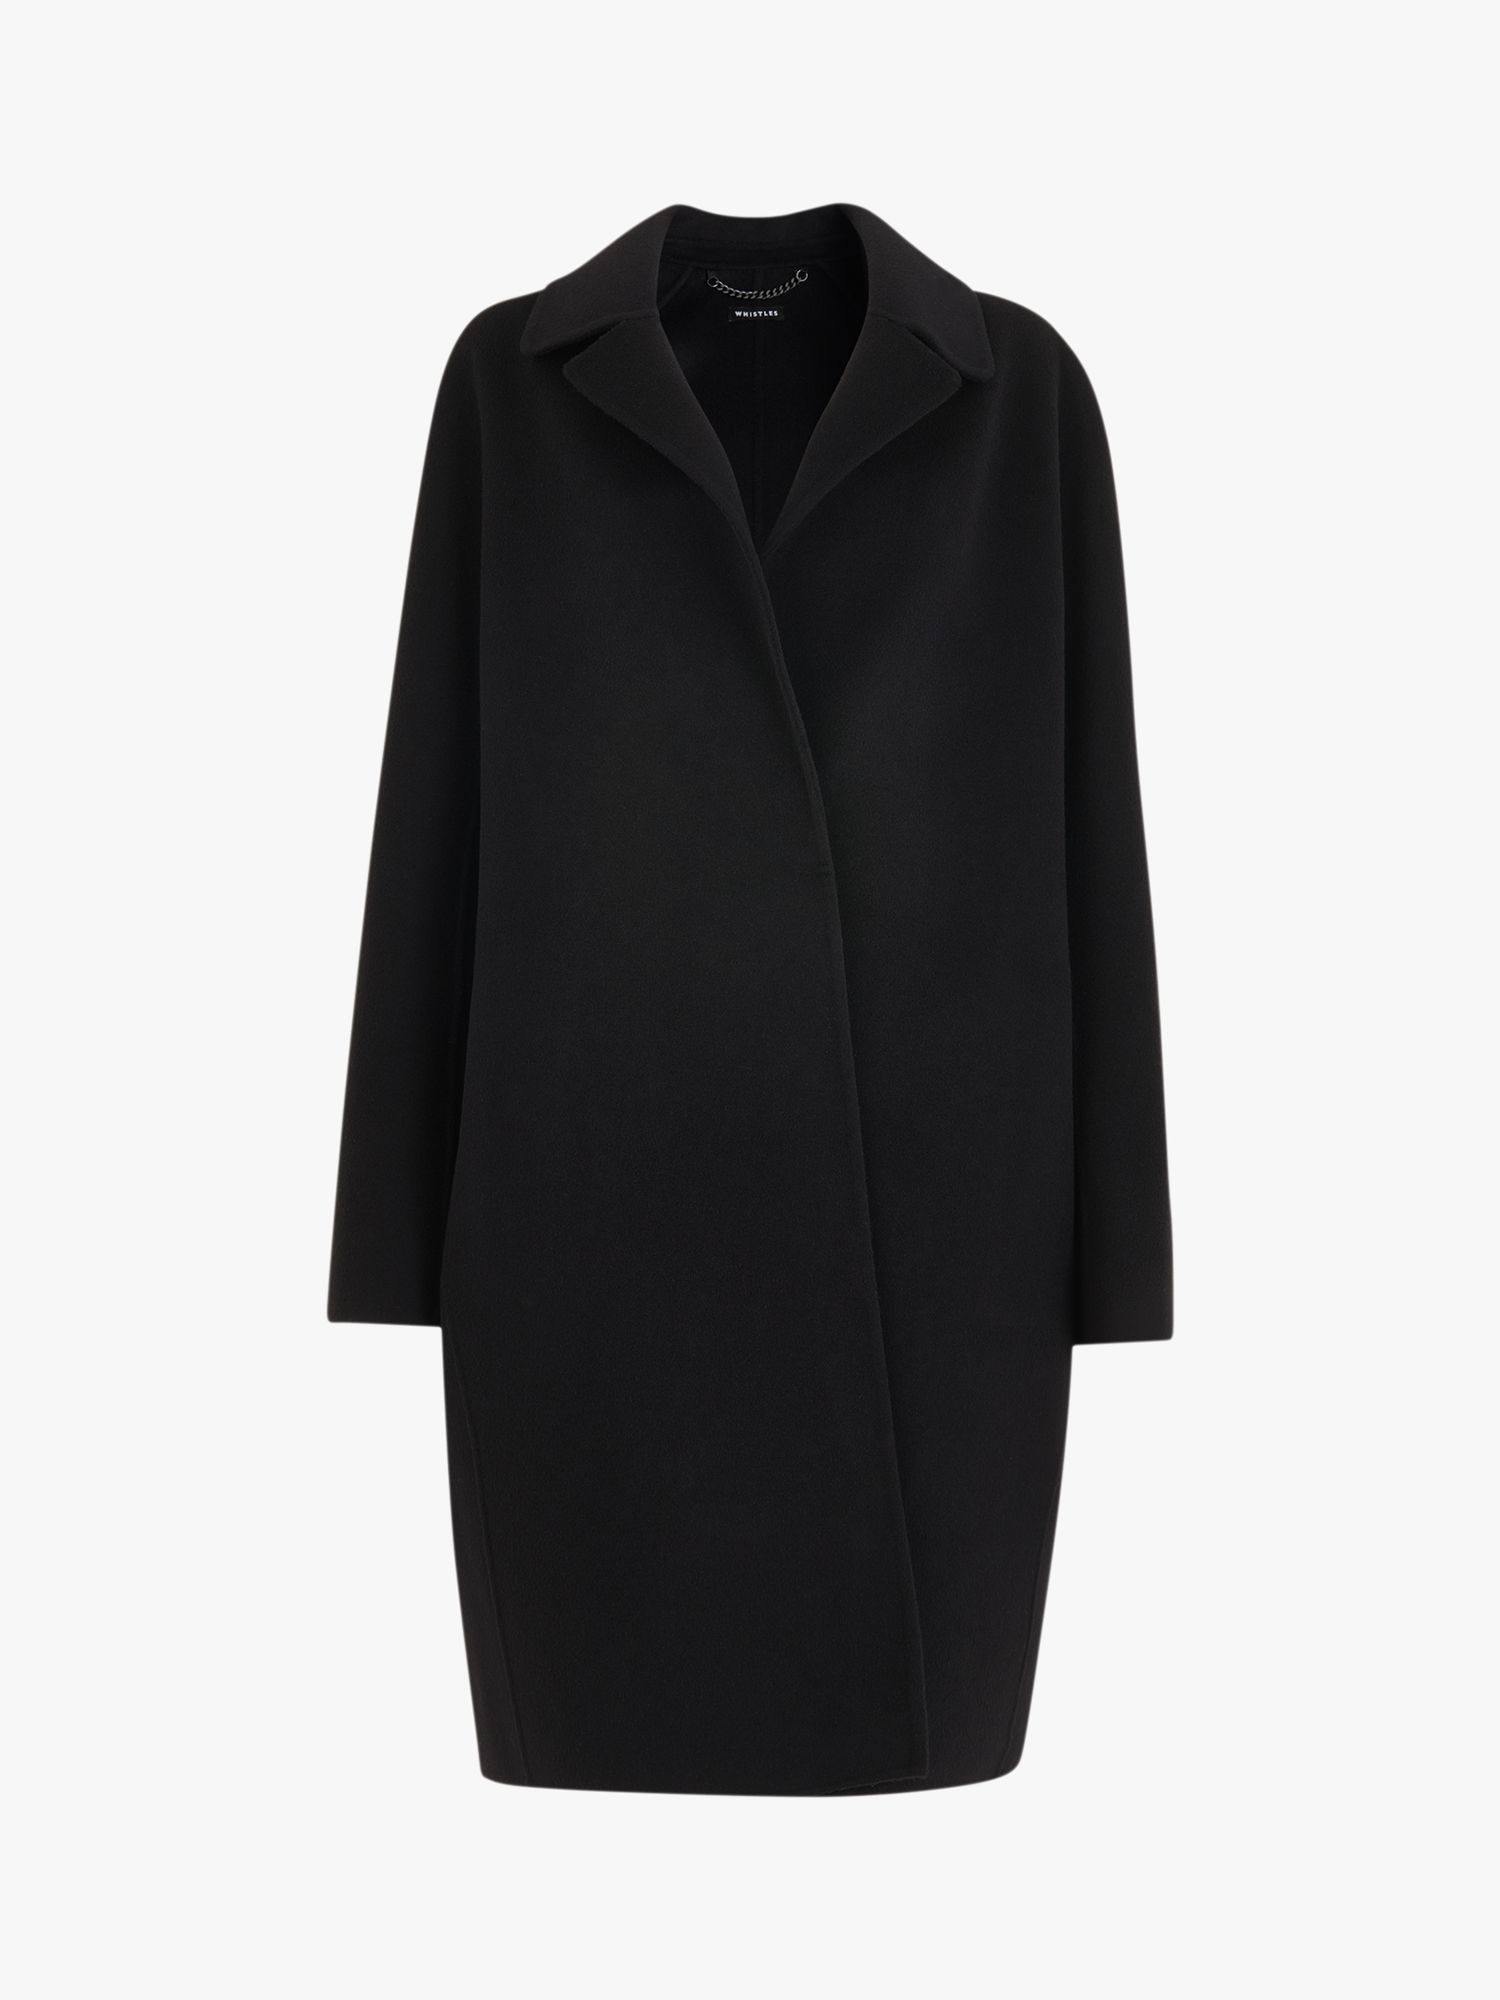 Whistles Double Faced Wool Blend Coat, Black at John Lewis & Partners